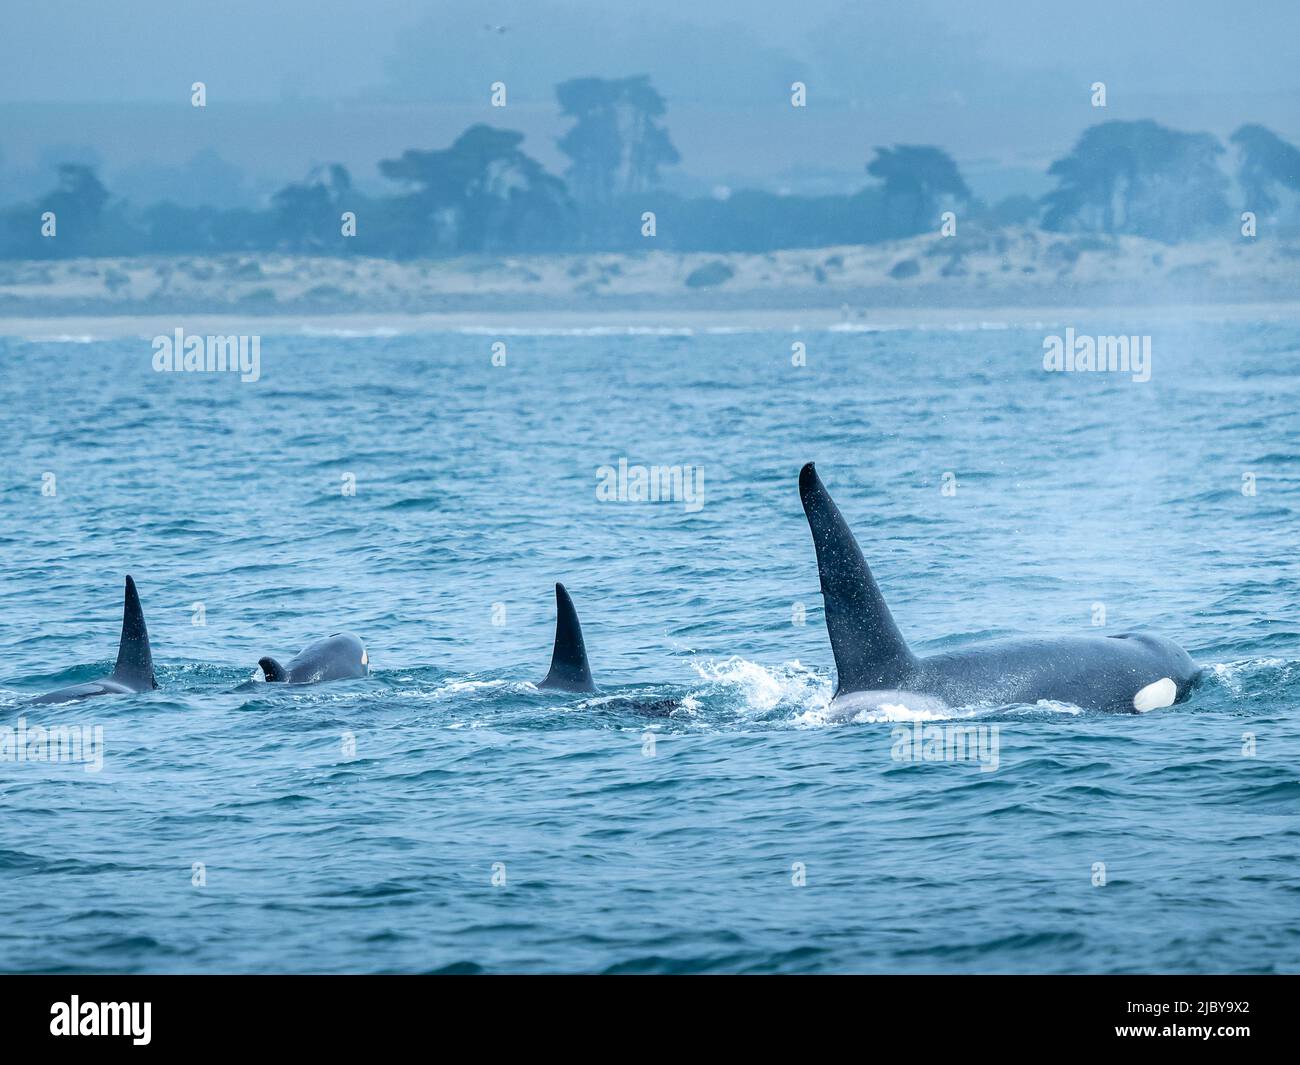 Orca family, Transiant Killer Whales (Orca orcinus) hunting in Monterey Bay, Monterey Bay National Marine Refuge, California Stock Photo